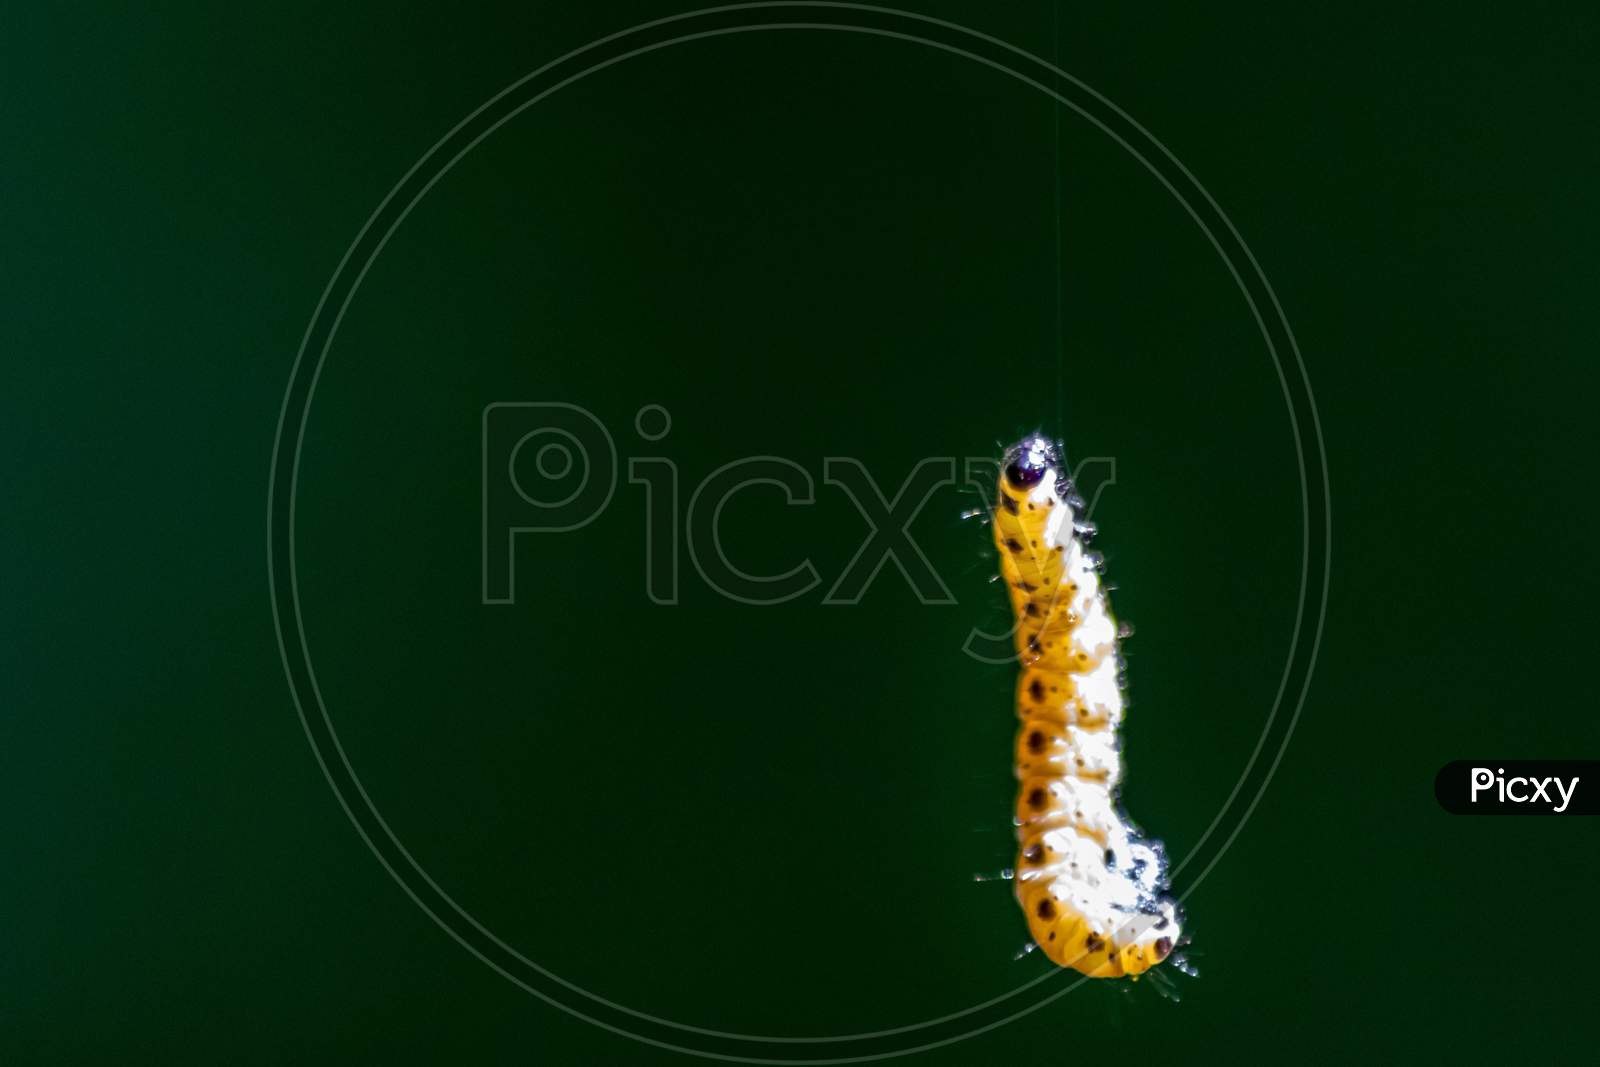 Little caterpillar hanging in the air on a silky line with natural blurred background uses silk cobwebs to climb on trees in yellow with black dots as next generation butterfly after metamorphosis